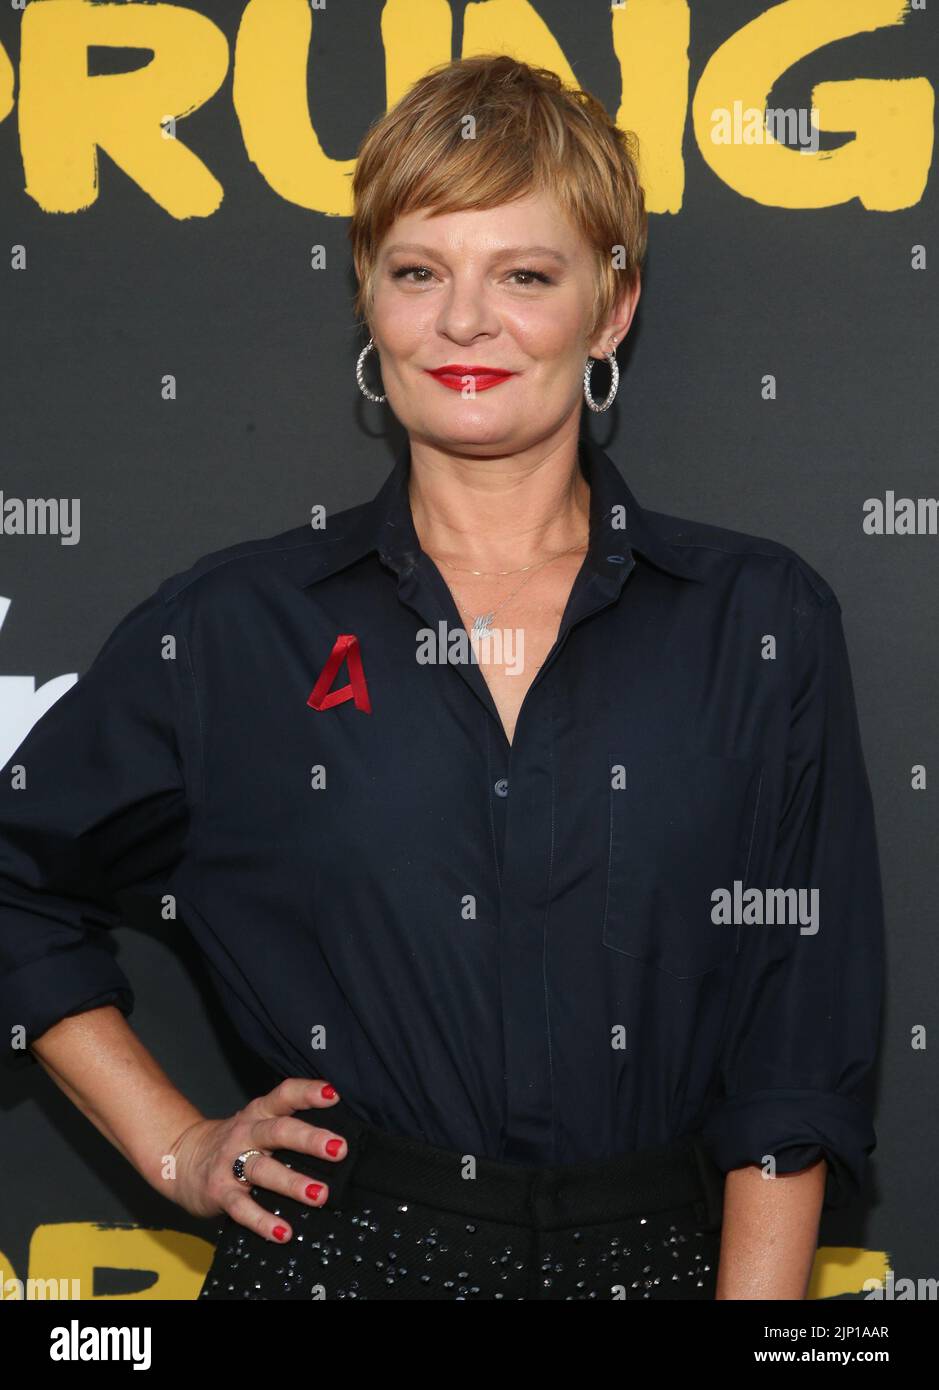 Los Angeles, California, USA. 14th Aug, 2022. Martha Plimpton. Red Carpet Premiere Of Freevee's 'Sprung' held at the Hollywood Forever Cemetery in Los Angeles. Credit: AdMedia Photo via/Newscom/Alamy Live News Stock Photo